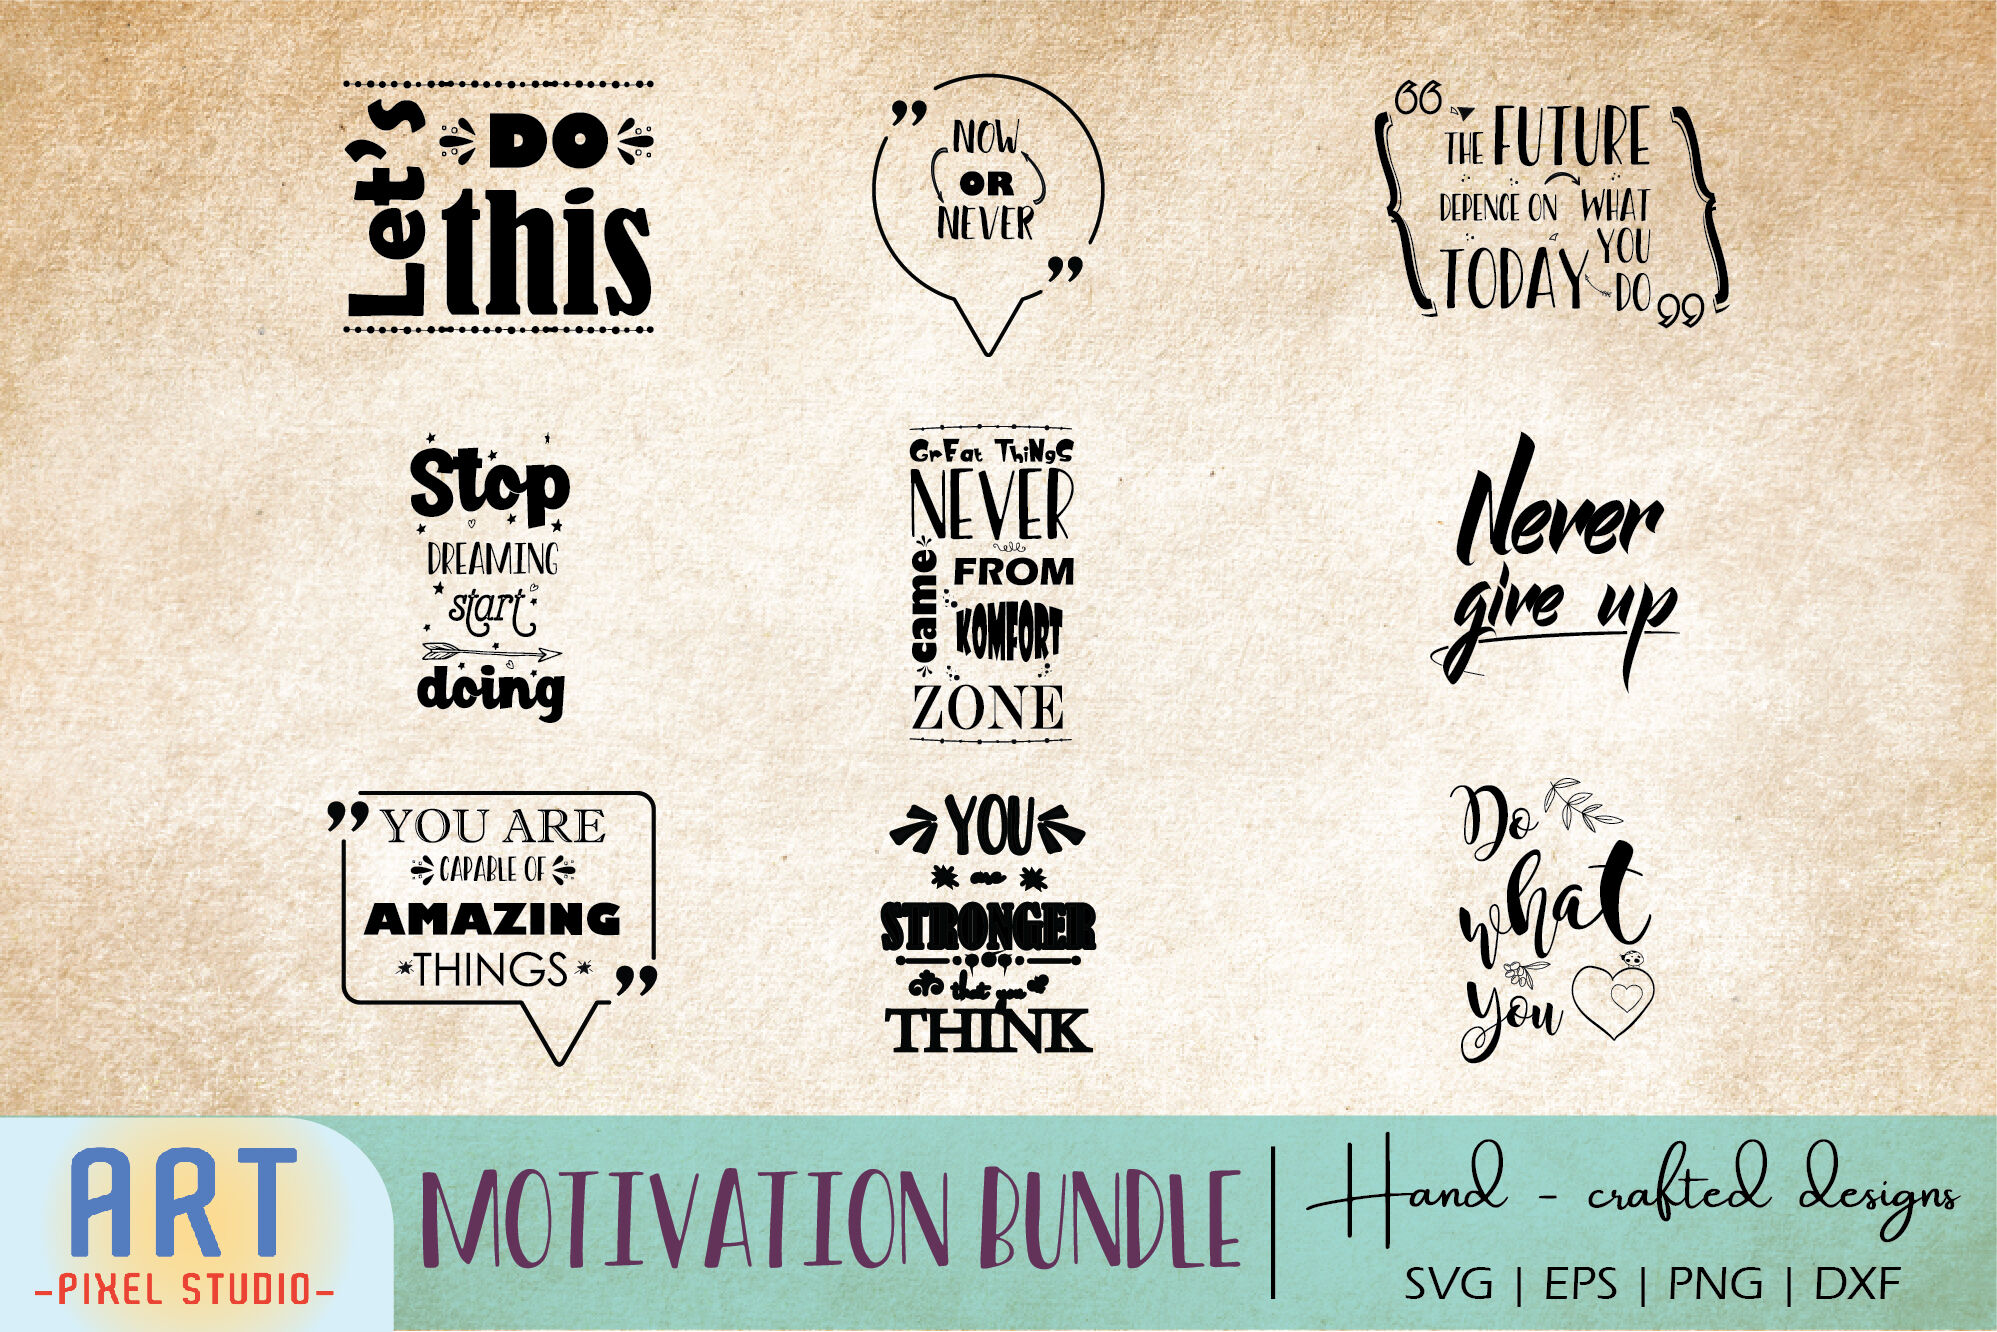 Download Motivational Quotes, Inspirational Quotes SVG, Quote Wall Art By ART-pixel studio ...